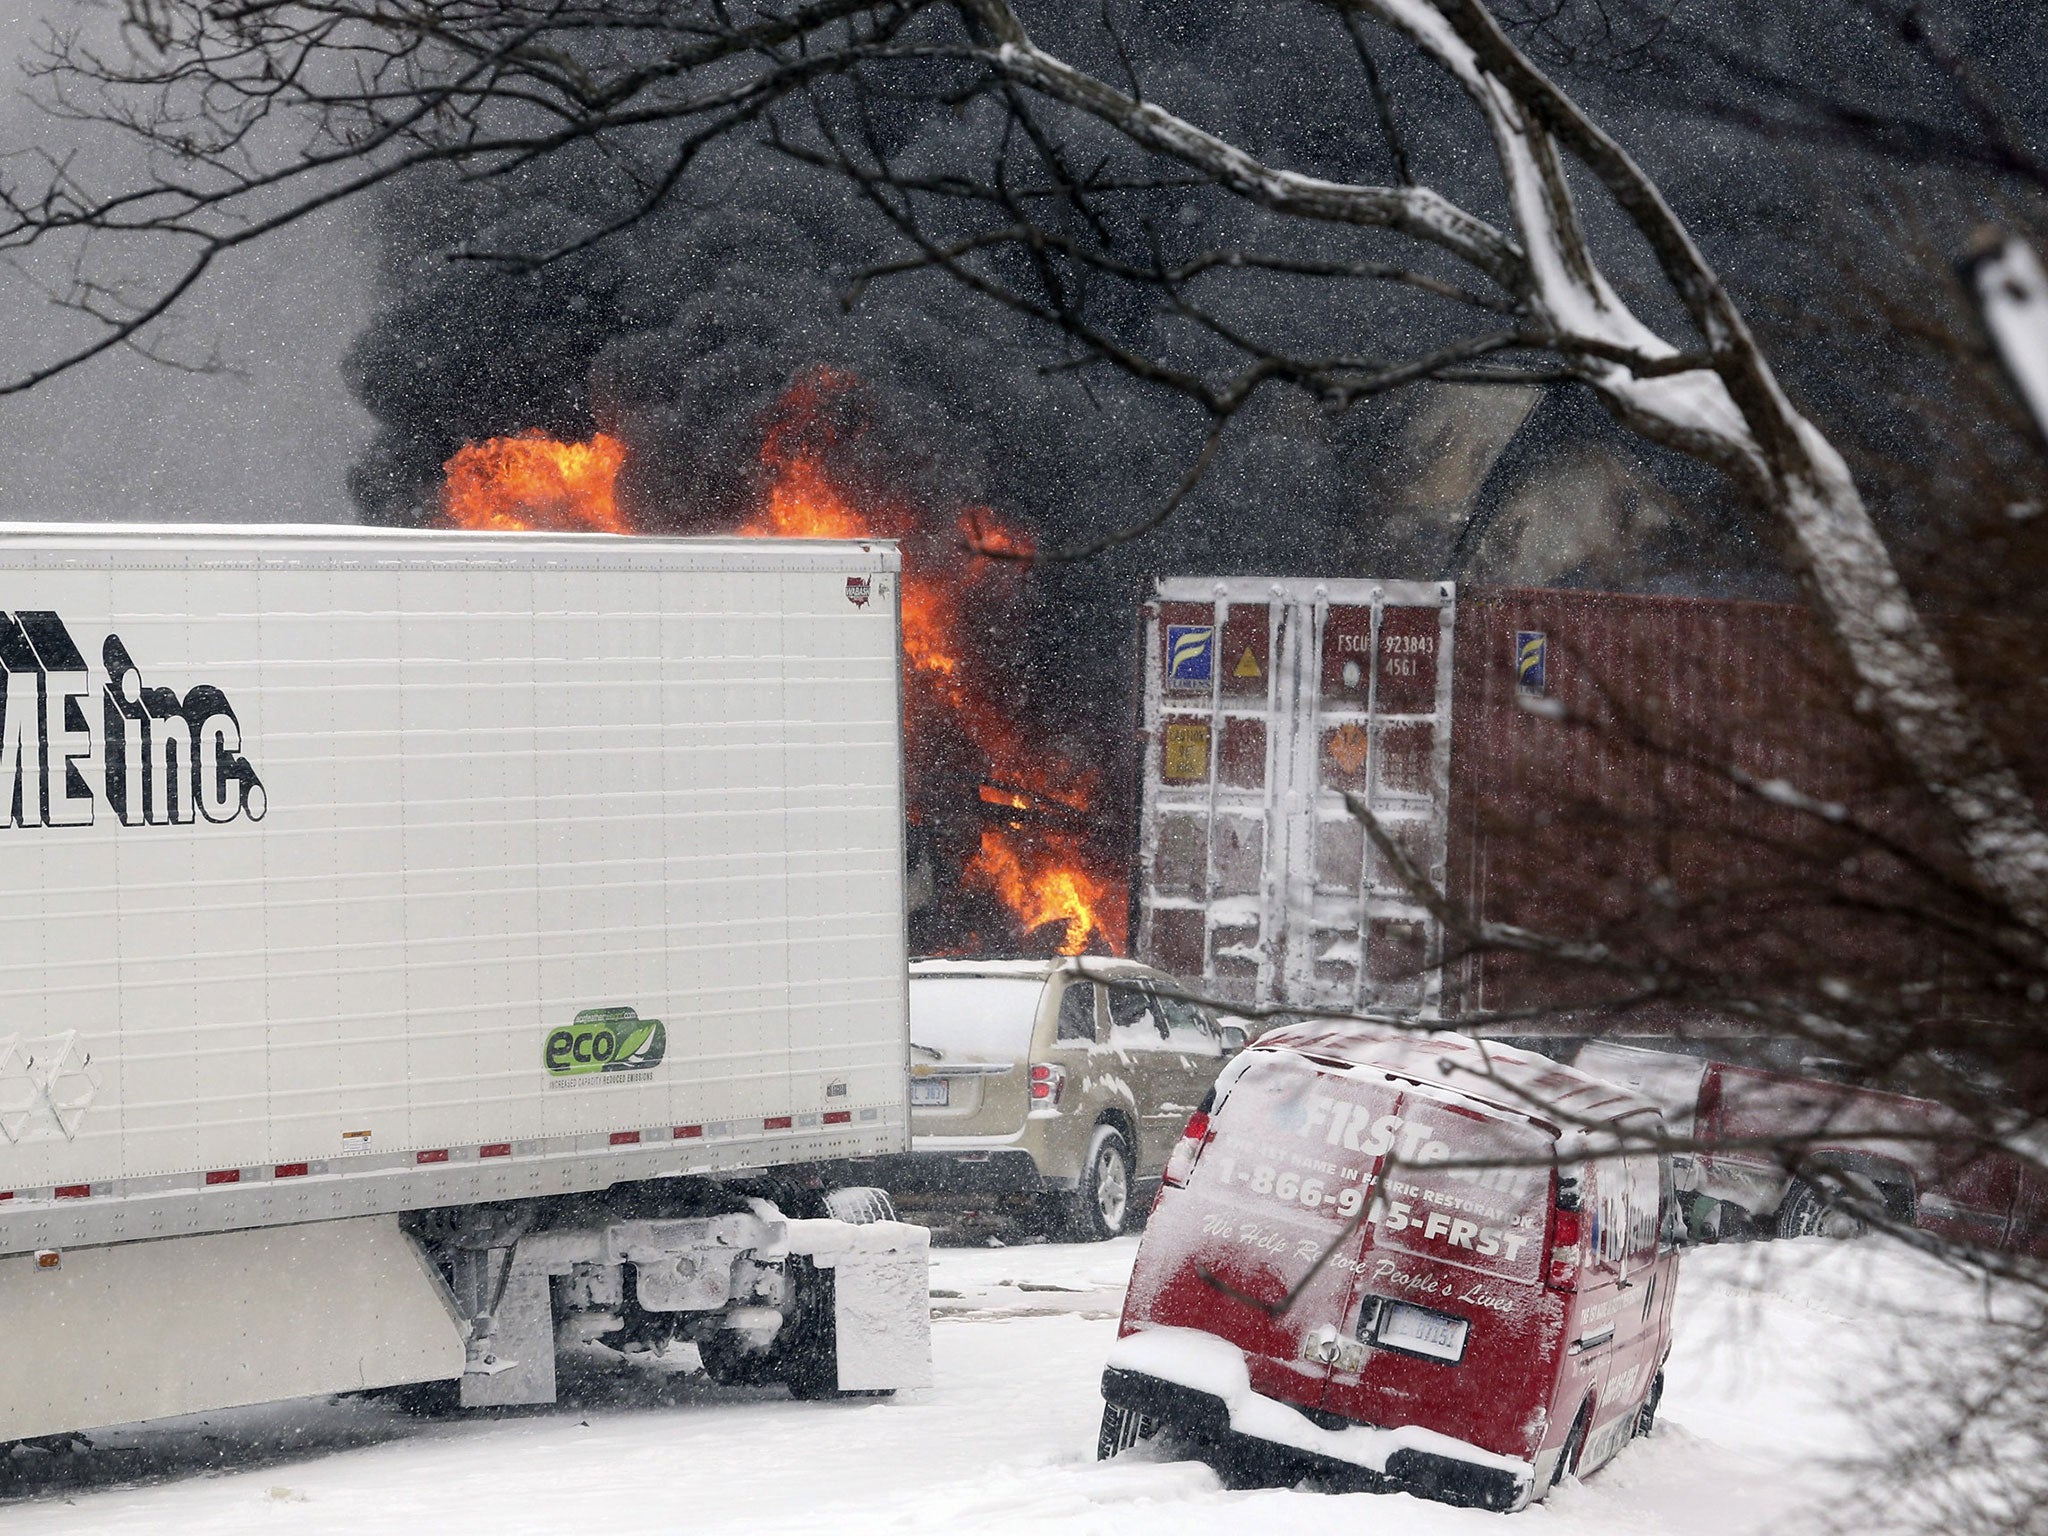 Vehicles burn at the scene of a fiery crash that closed both sides of Interstate 94, between mile markers 88 and 92 in eastern Kalamazoo County, near Galesburg, Mich.